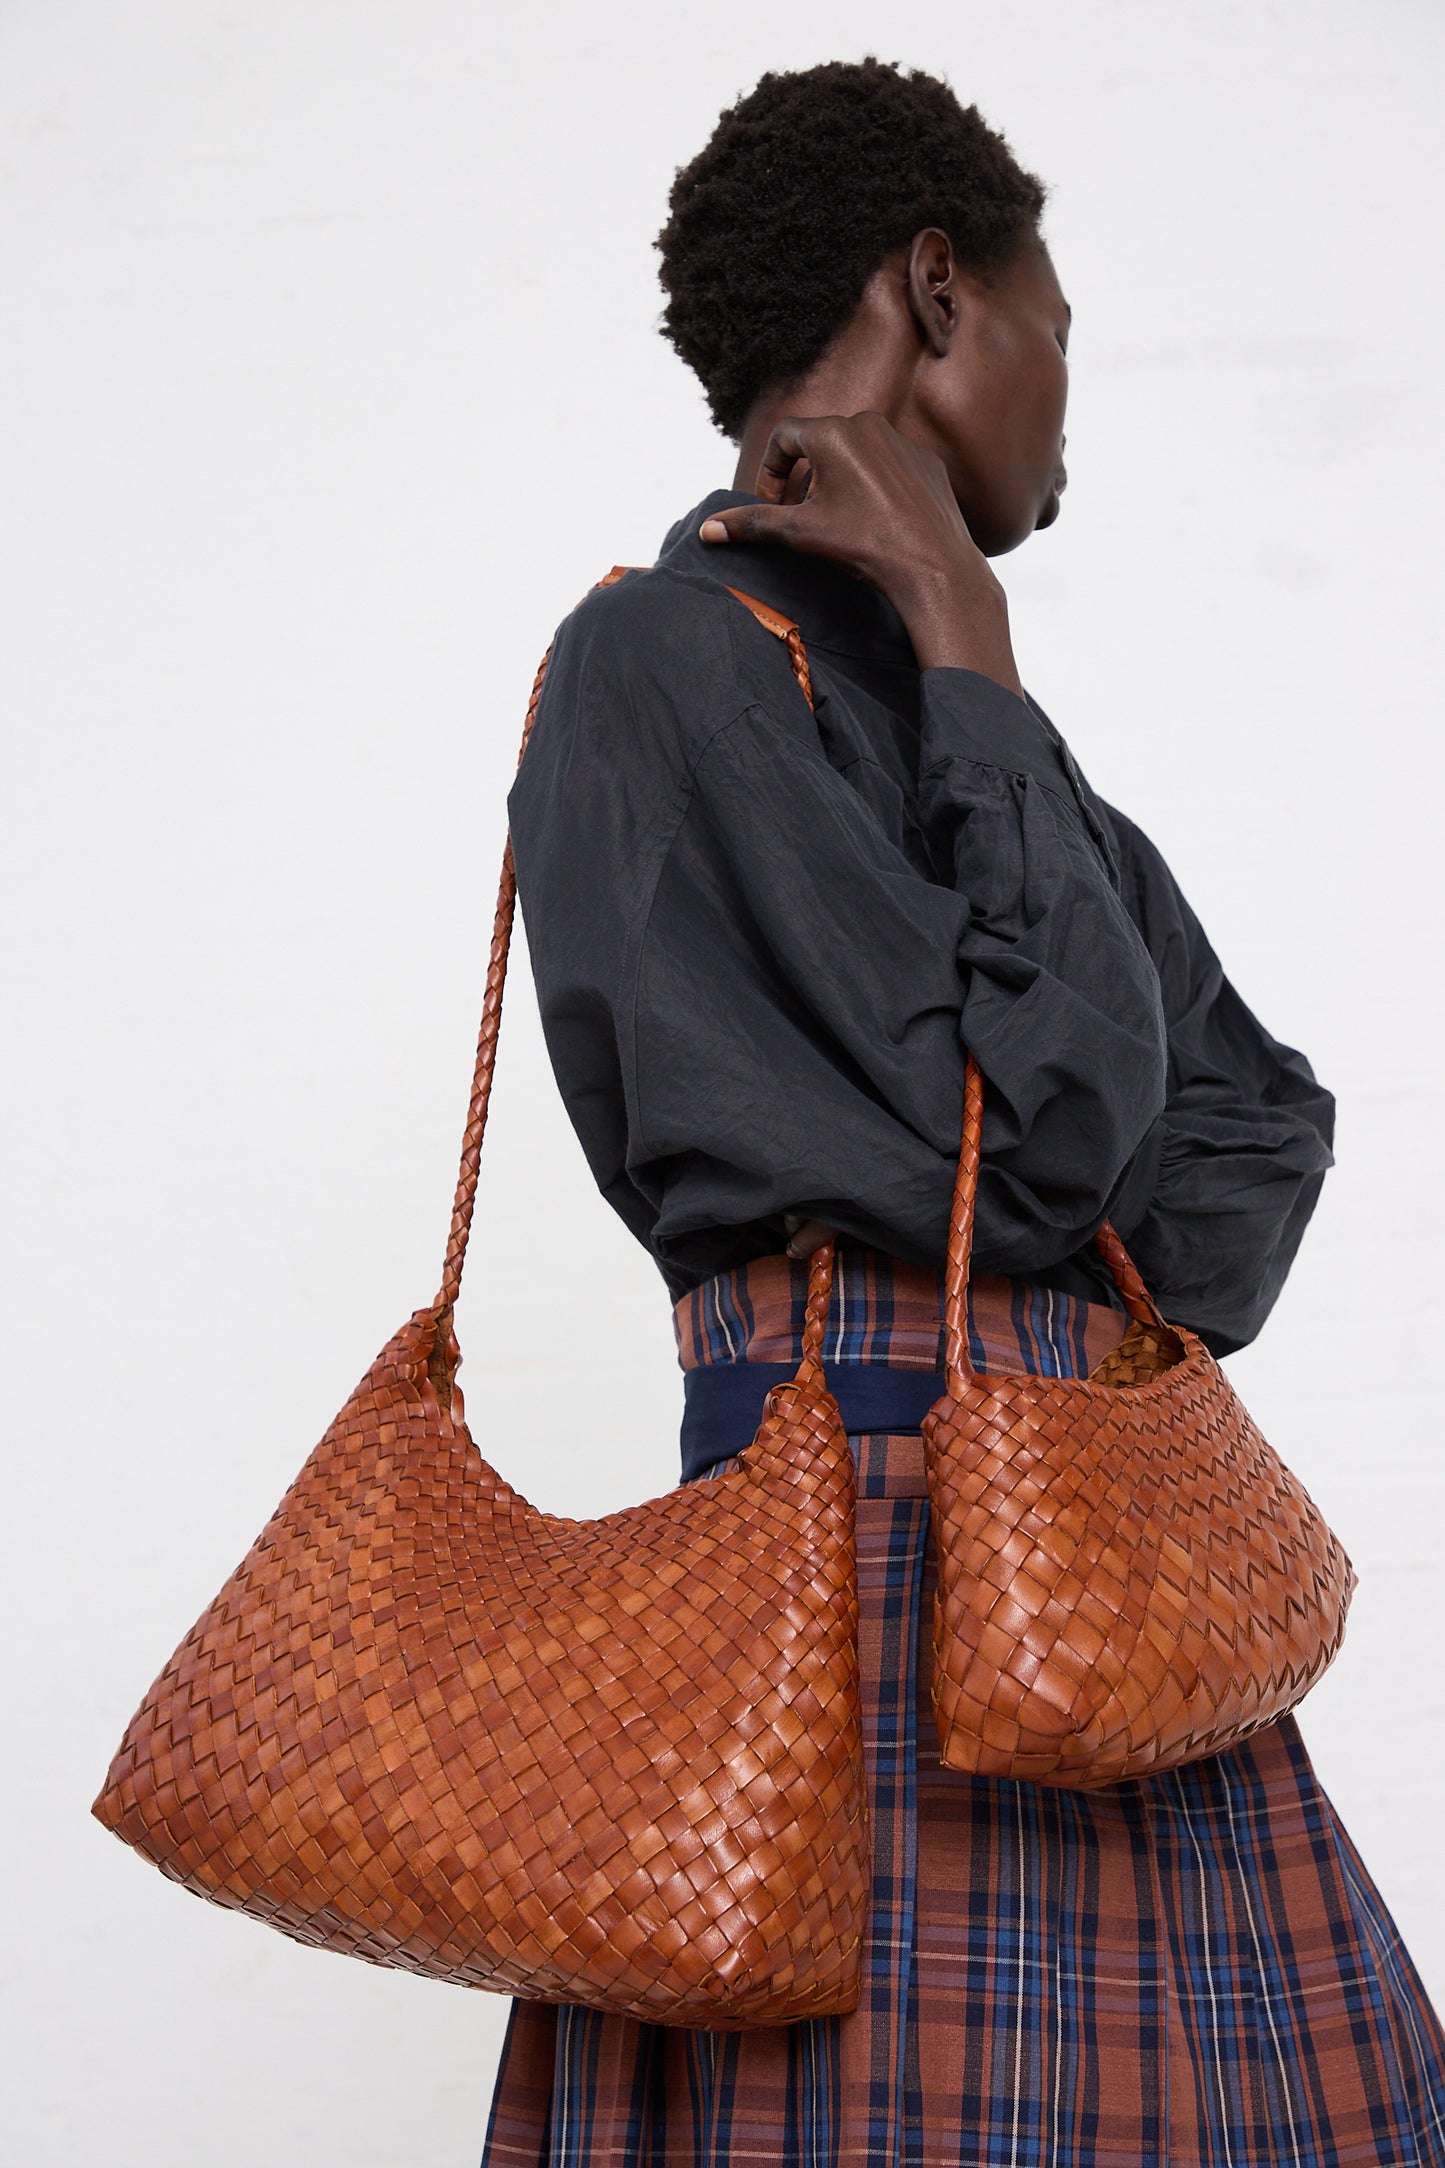 A woman in profile wearing a dark blouse and plaid skirt, holding two large handwoven Dragon Diffusion Rosanna in Tan bags, against a white background.